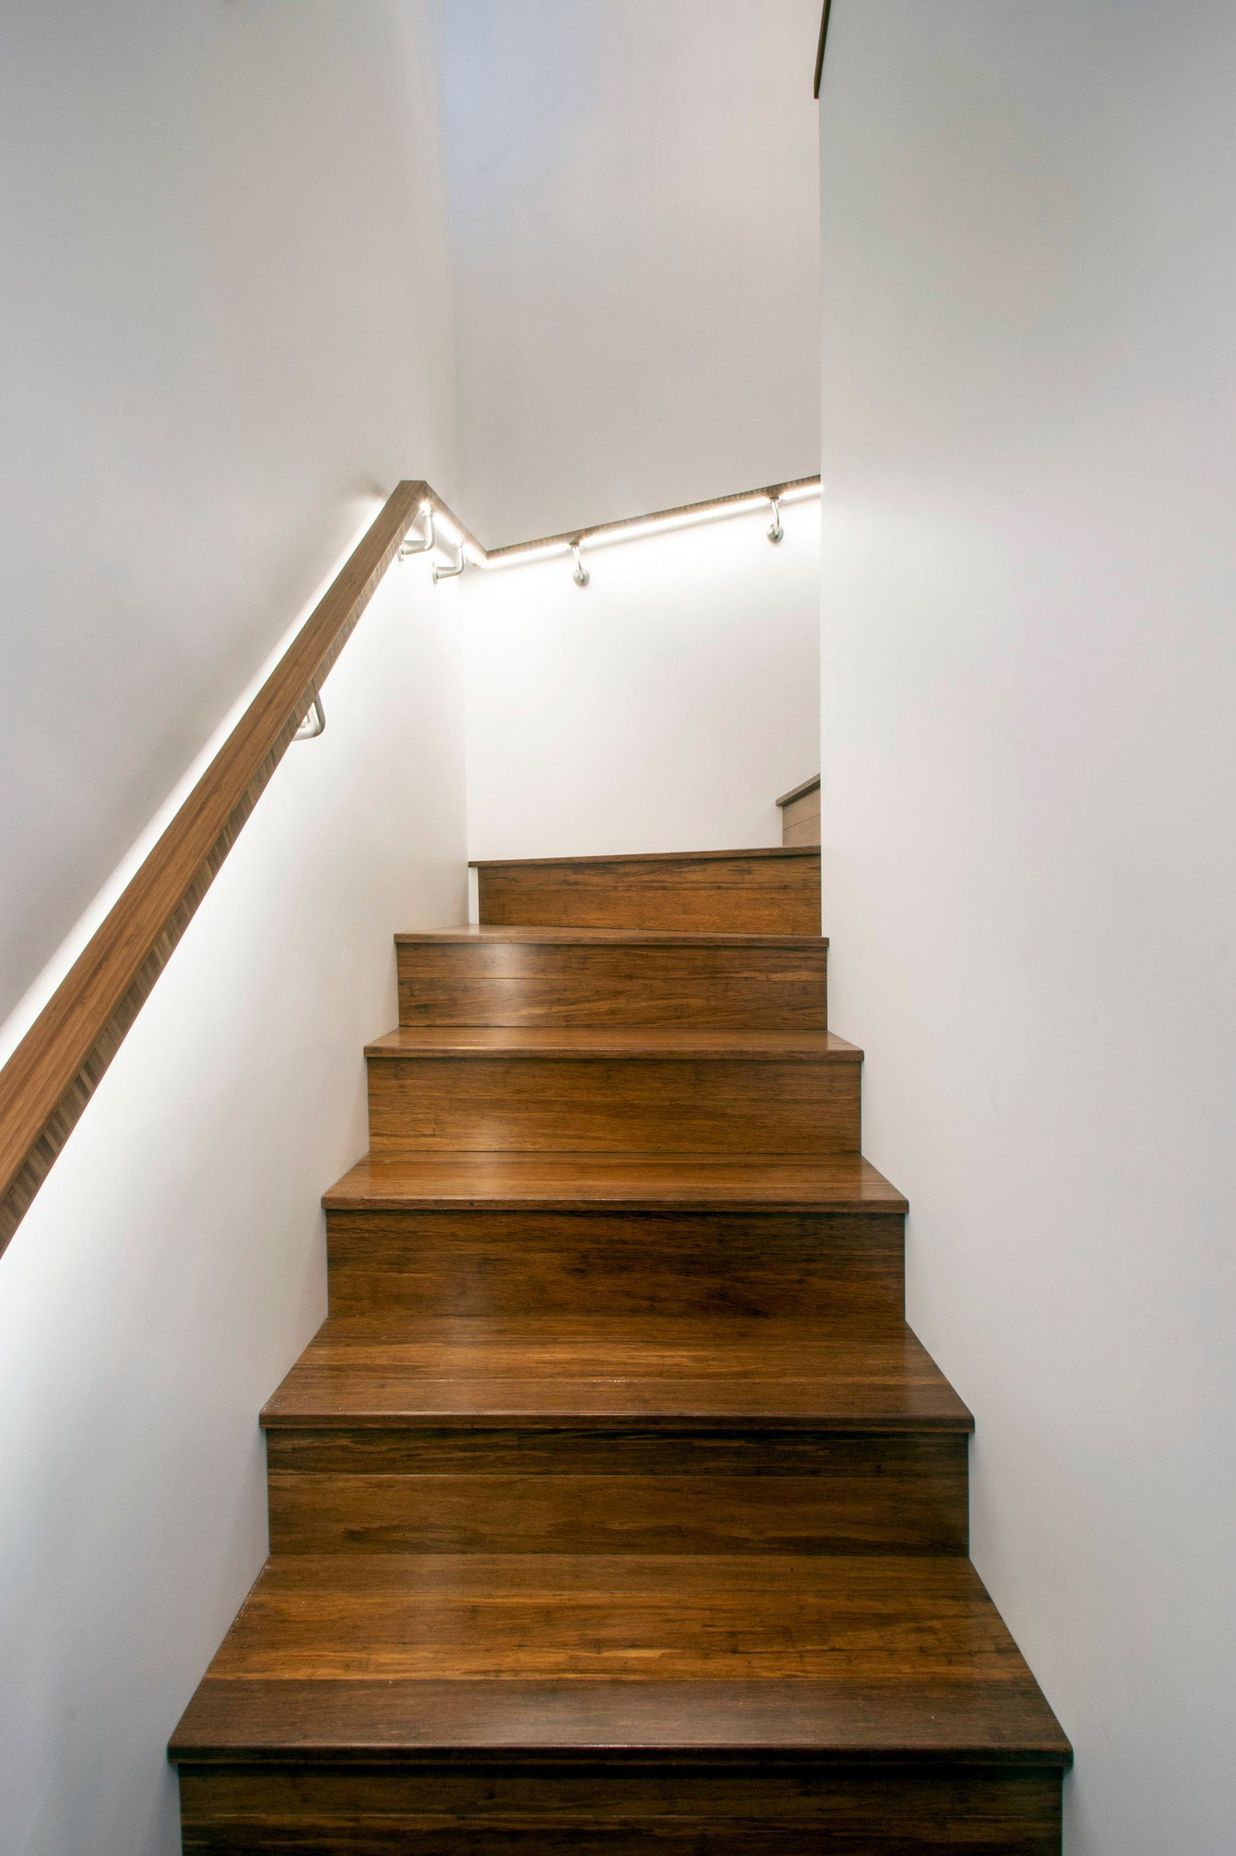 The staircase features bamboo treads.